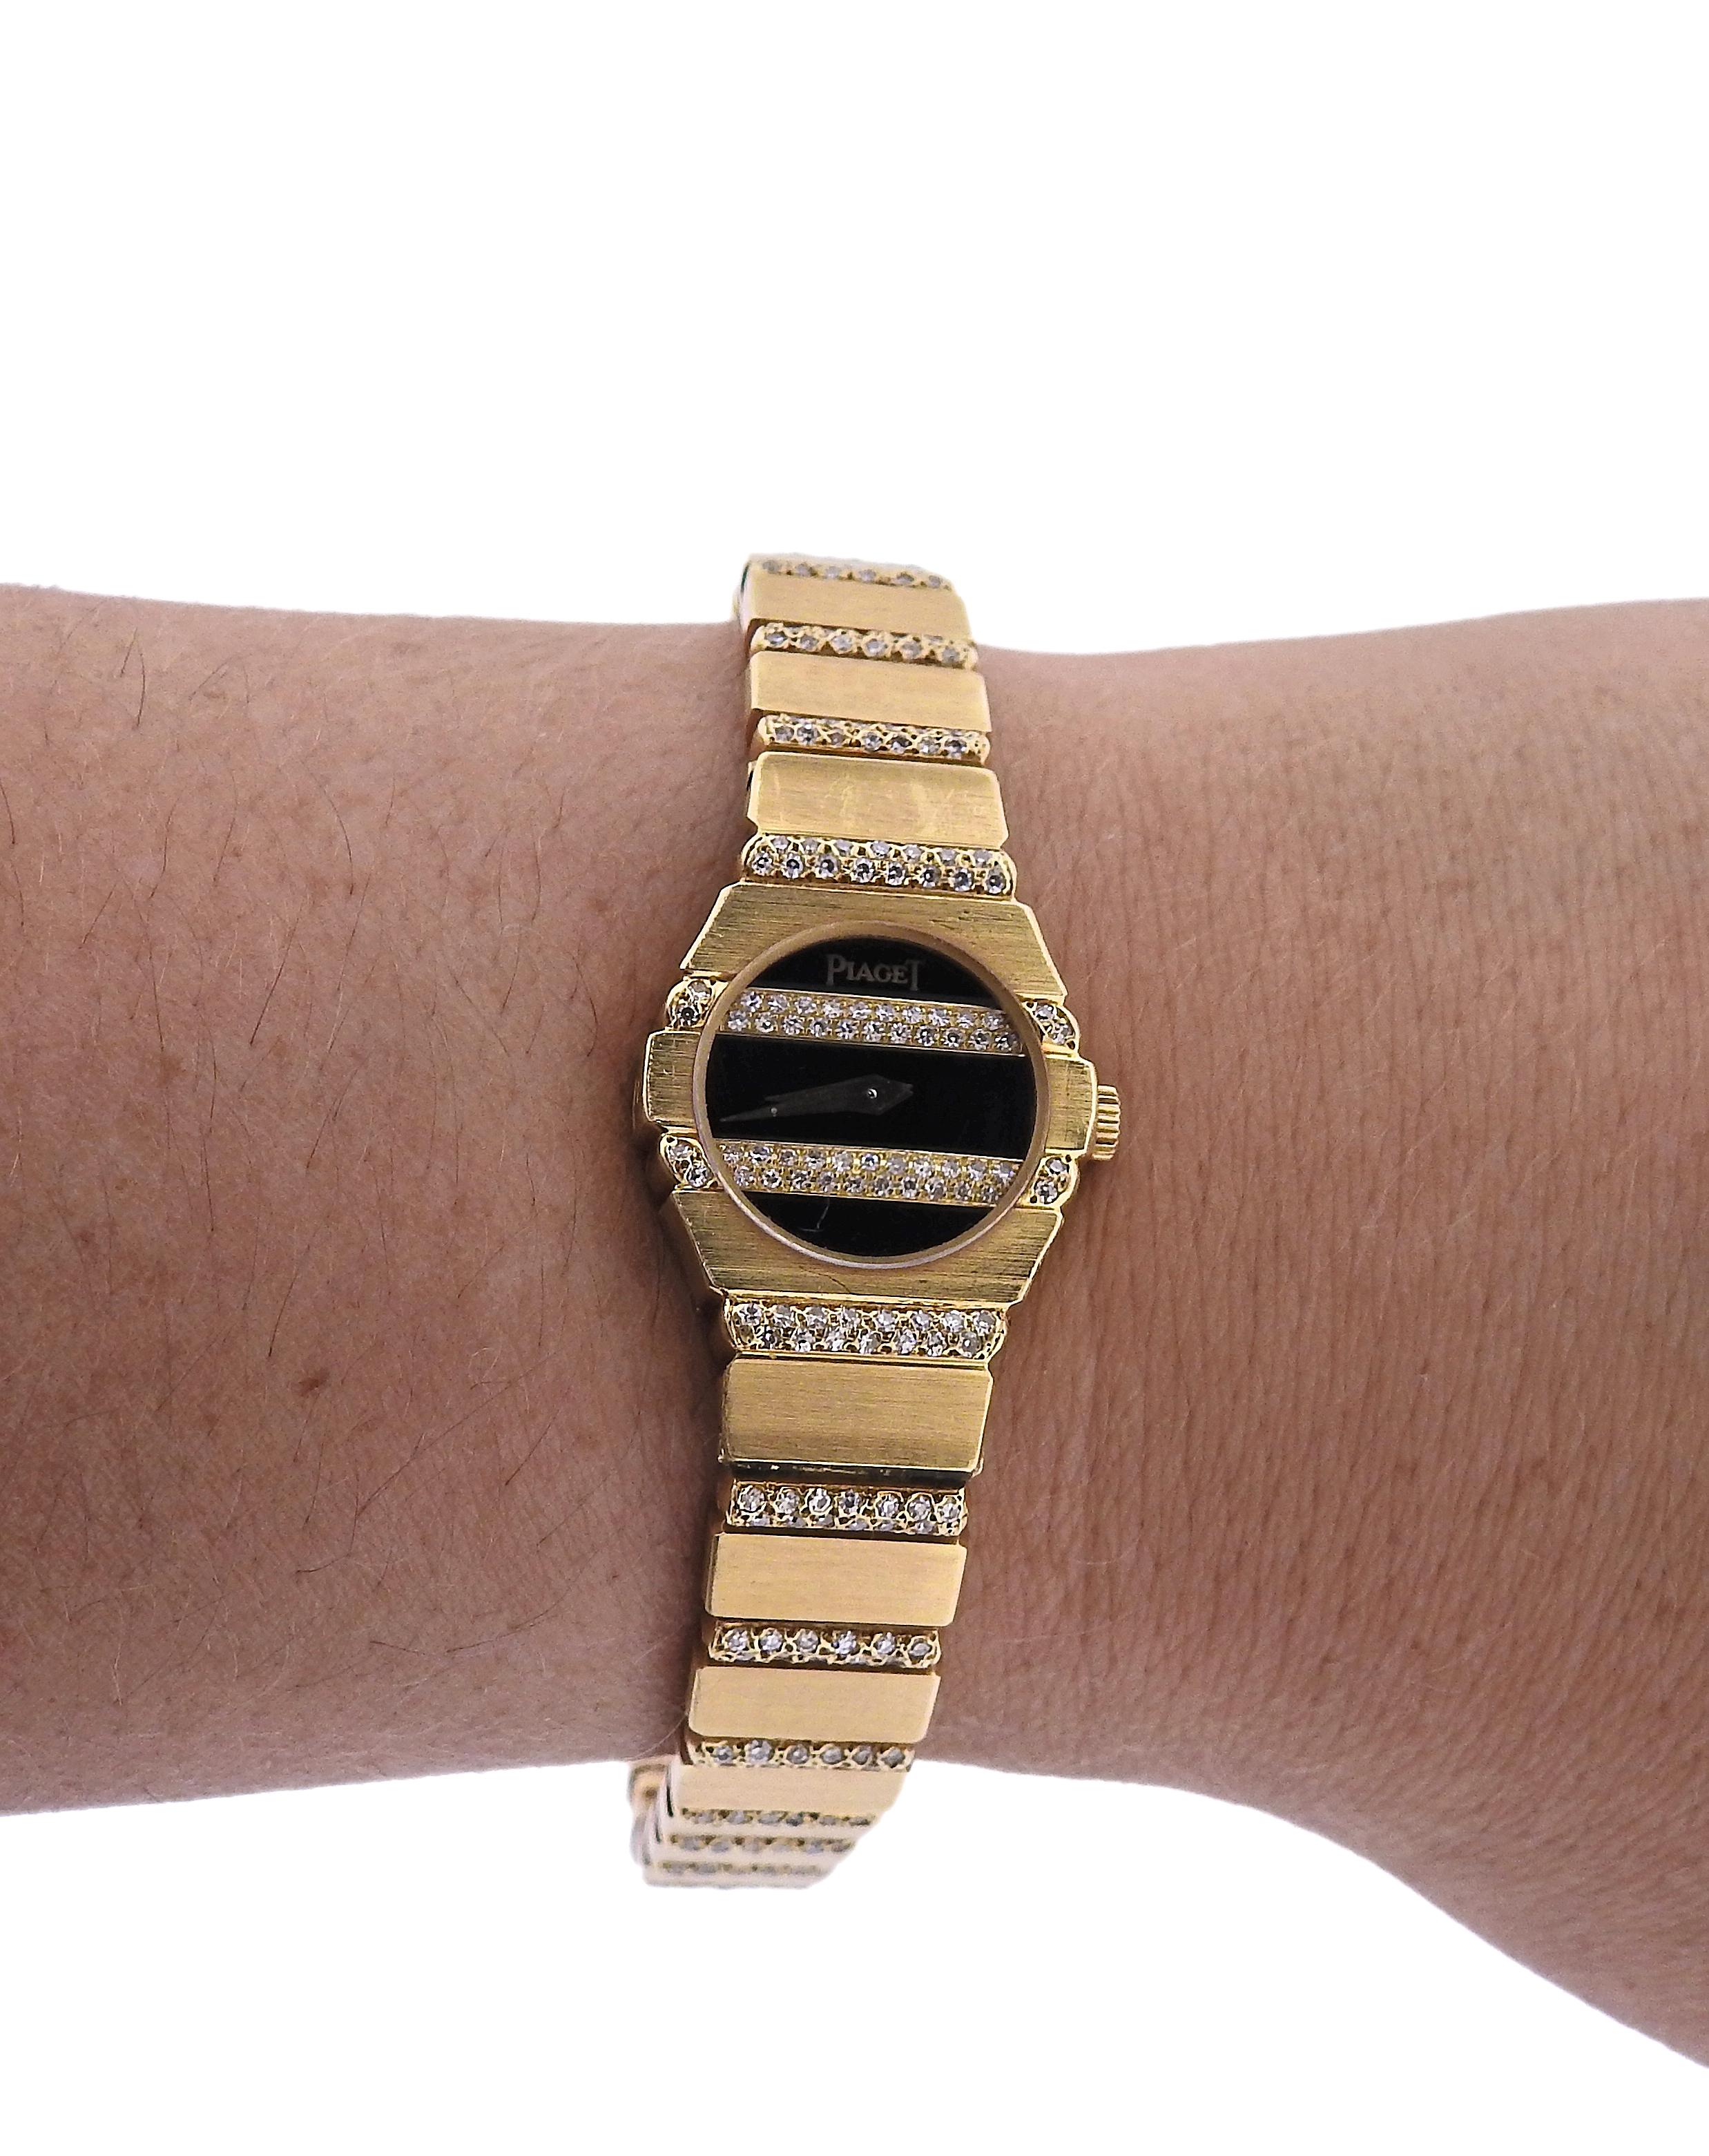 Piaget Polo Diamond Gold Watch In Excellent Condition For Sale In New York, NY